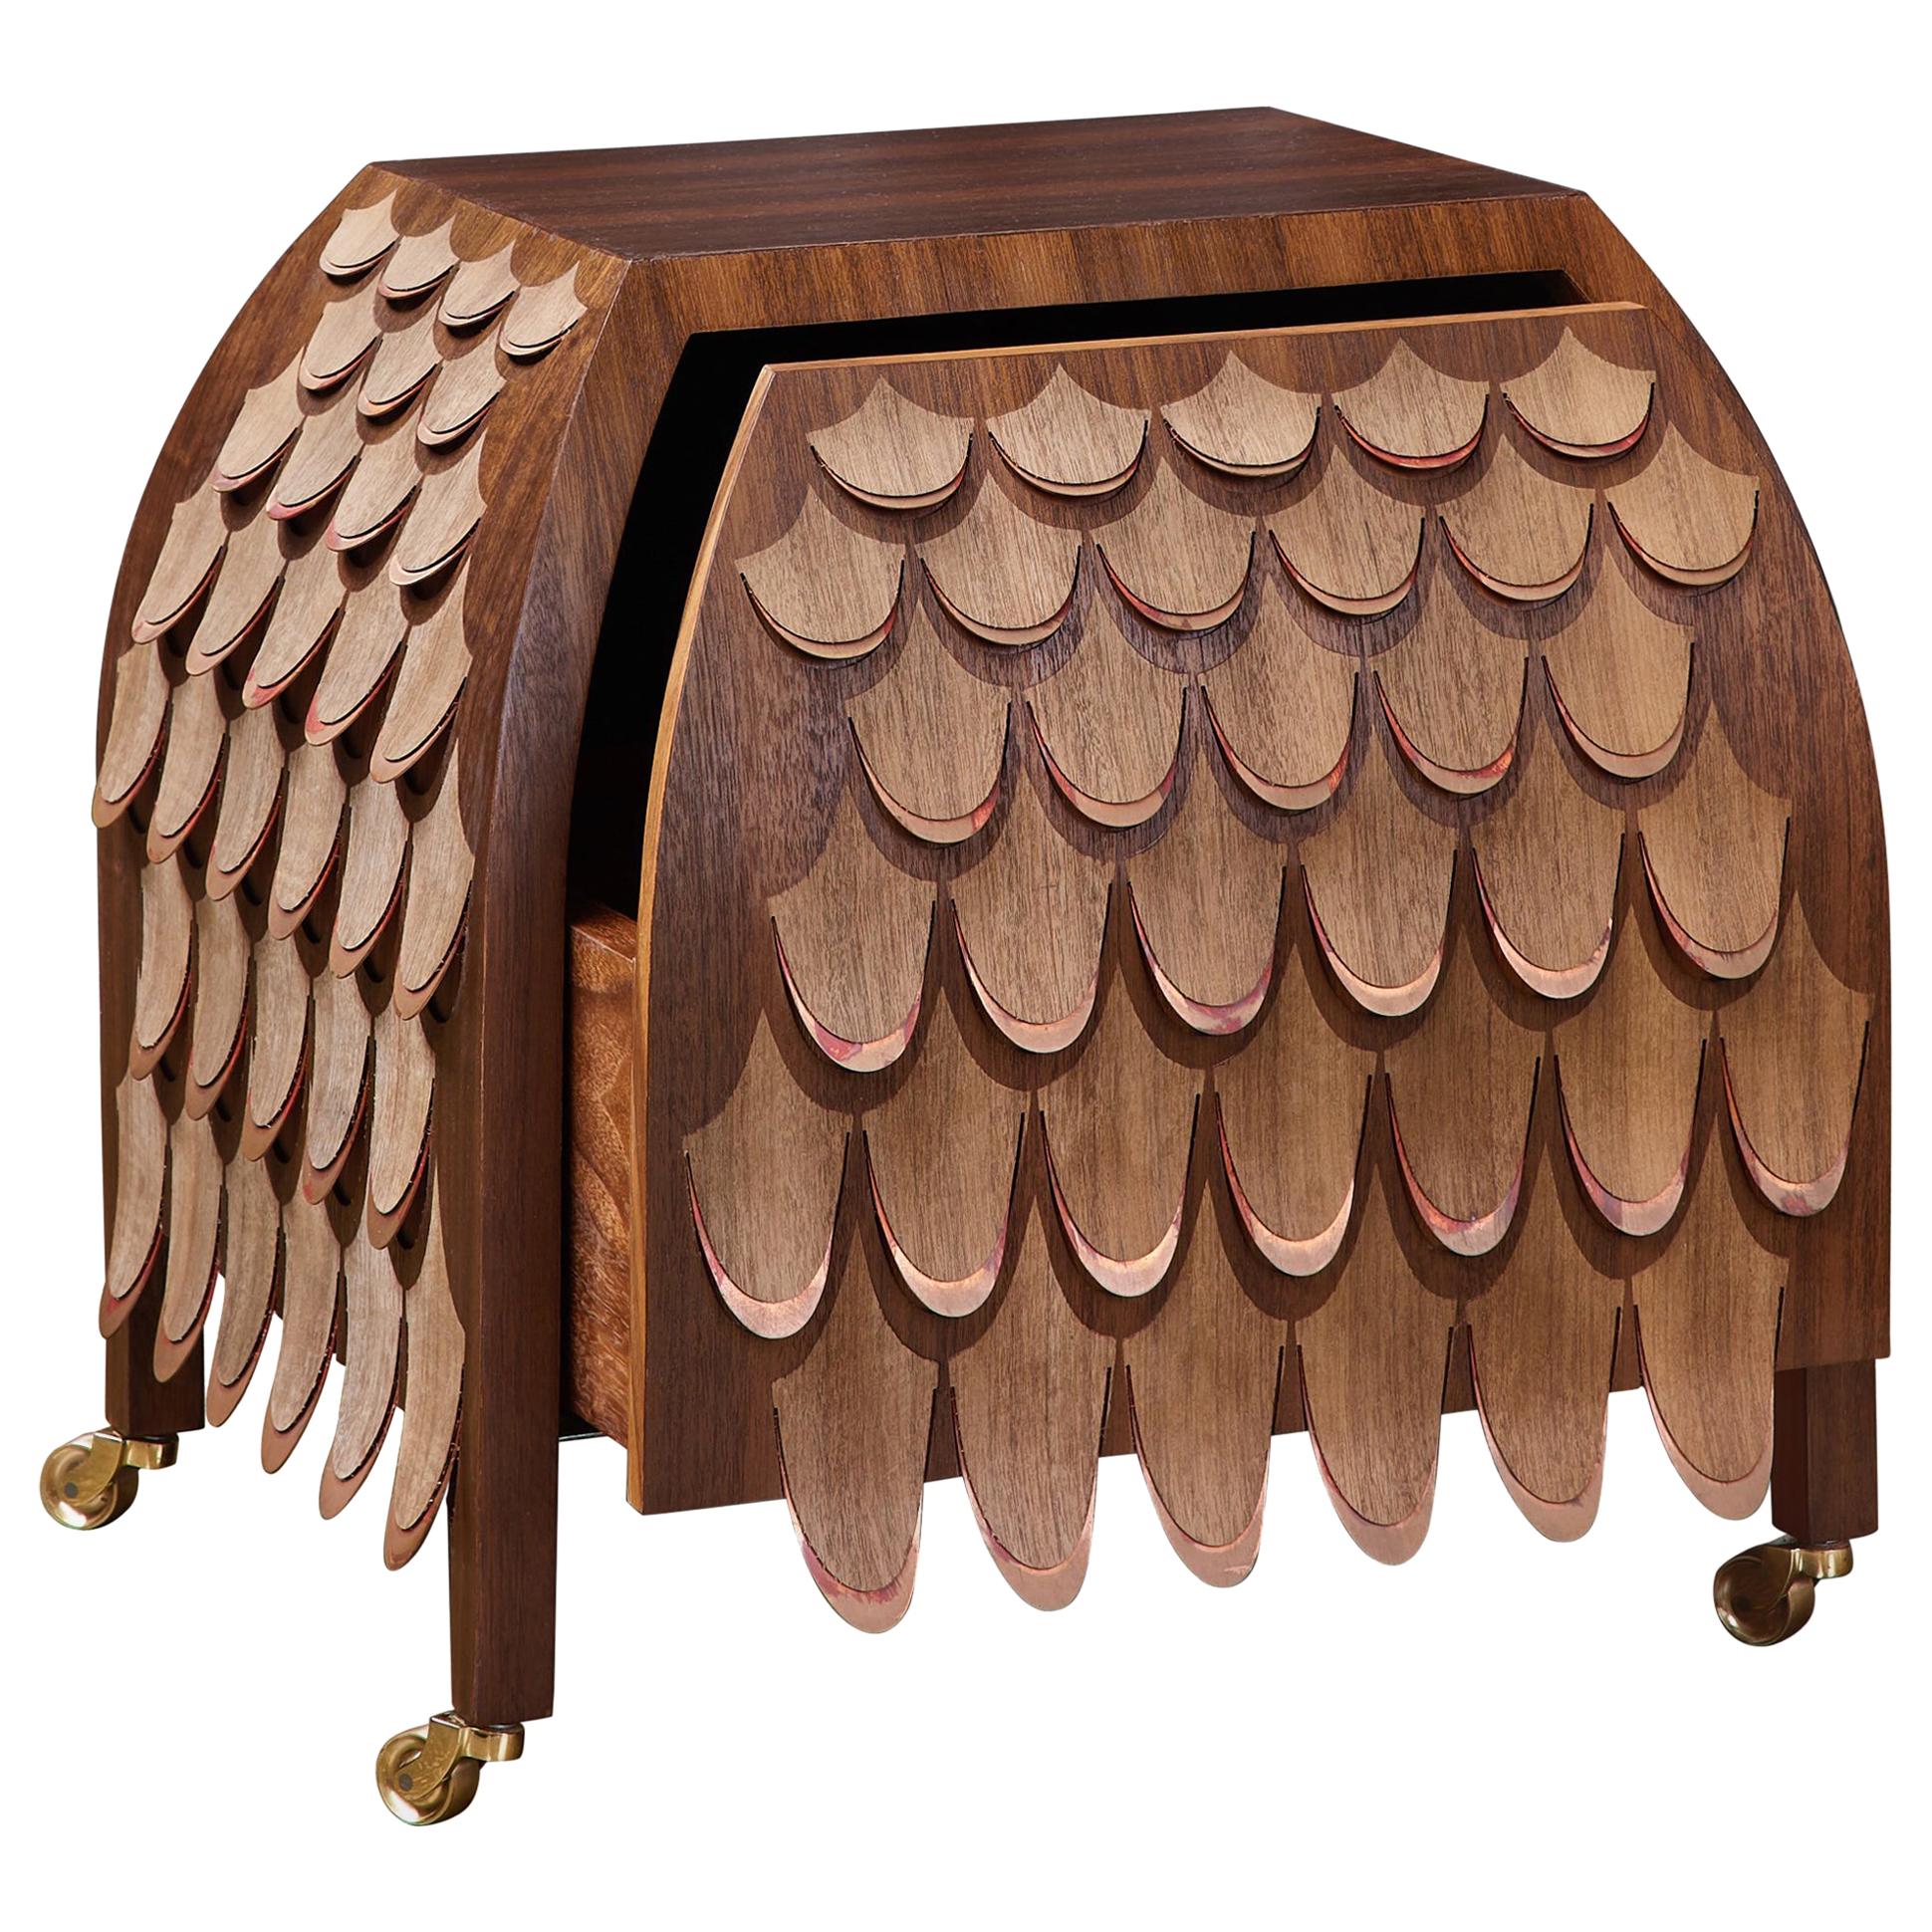 Pankalangu Side Table by Trent Jansen from Broached Monsters Collection For Sale